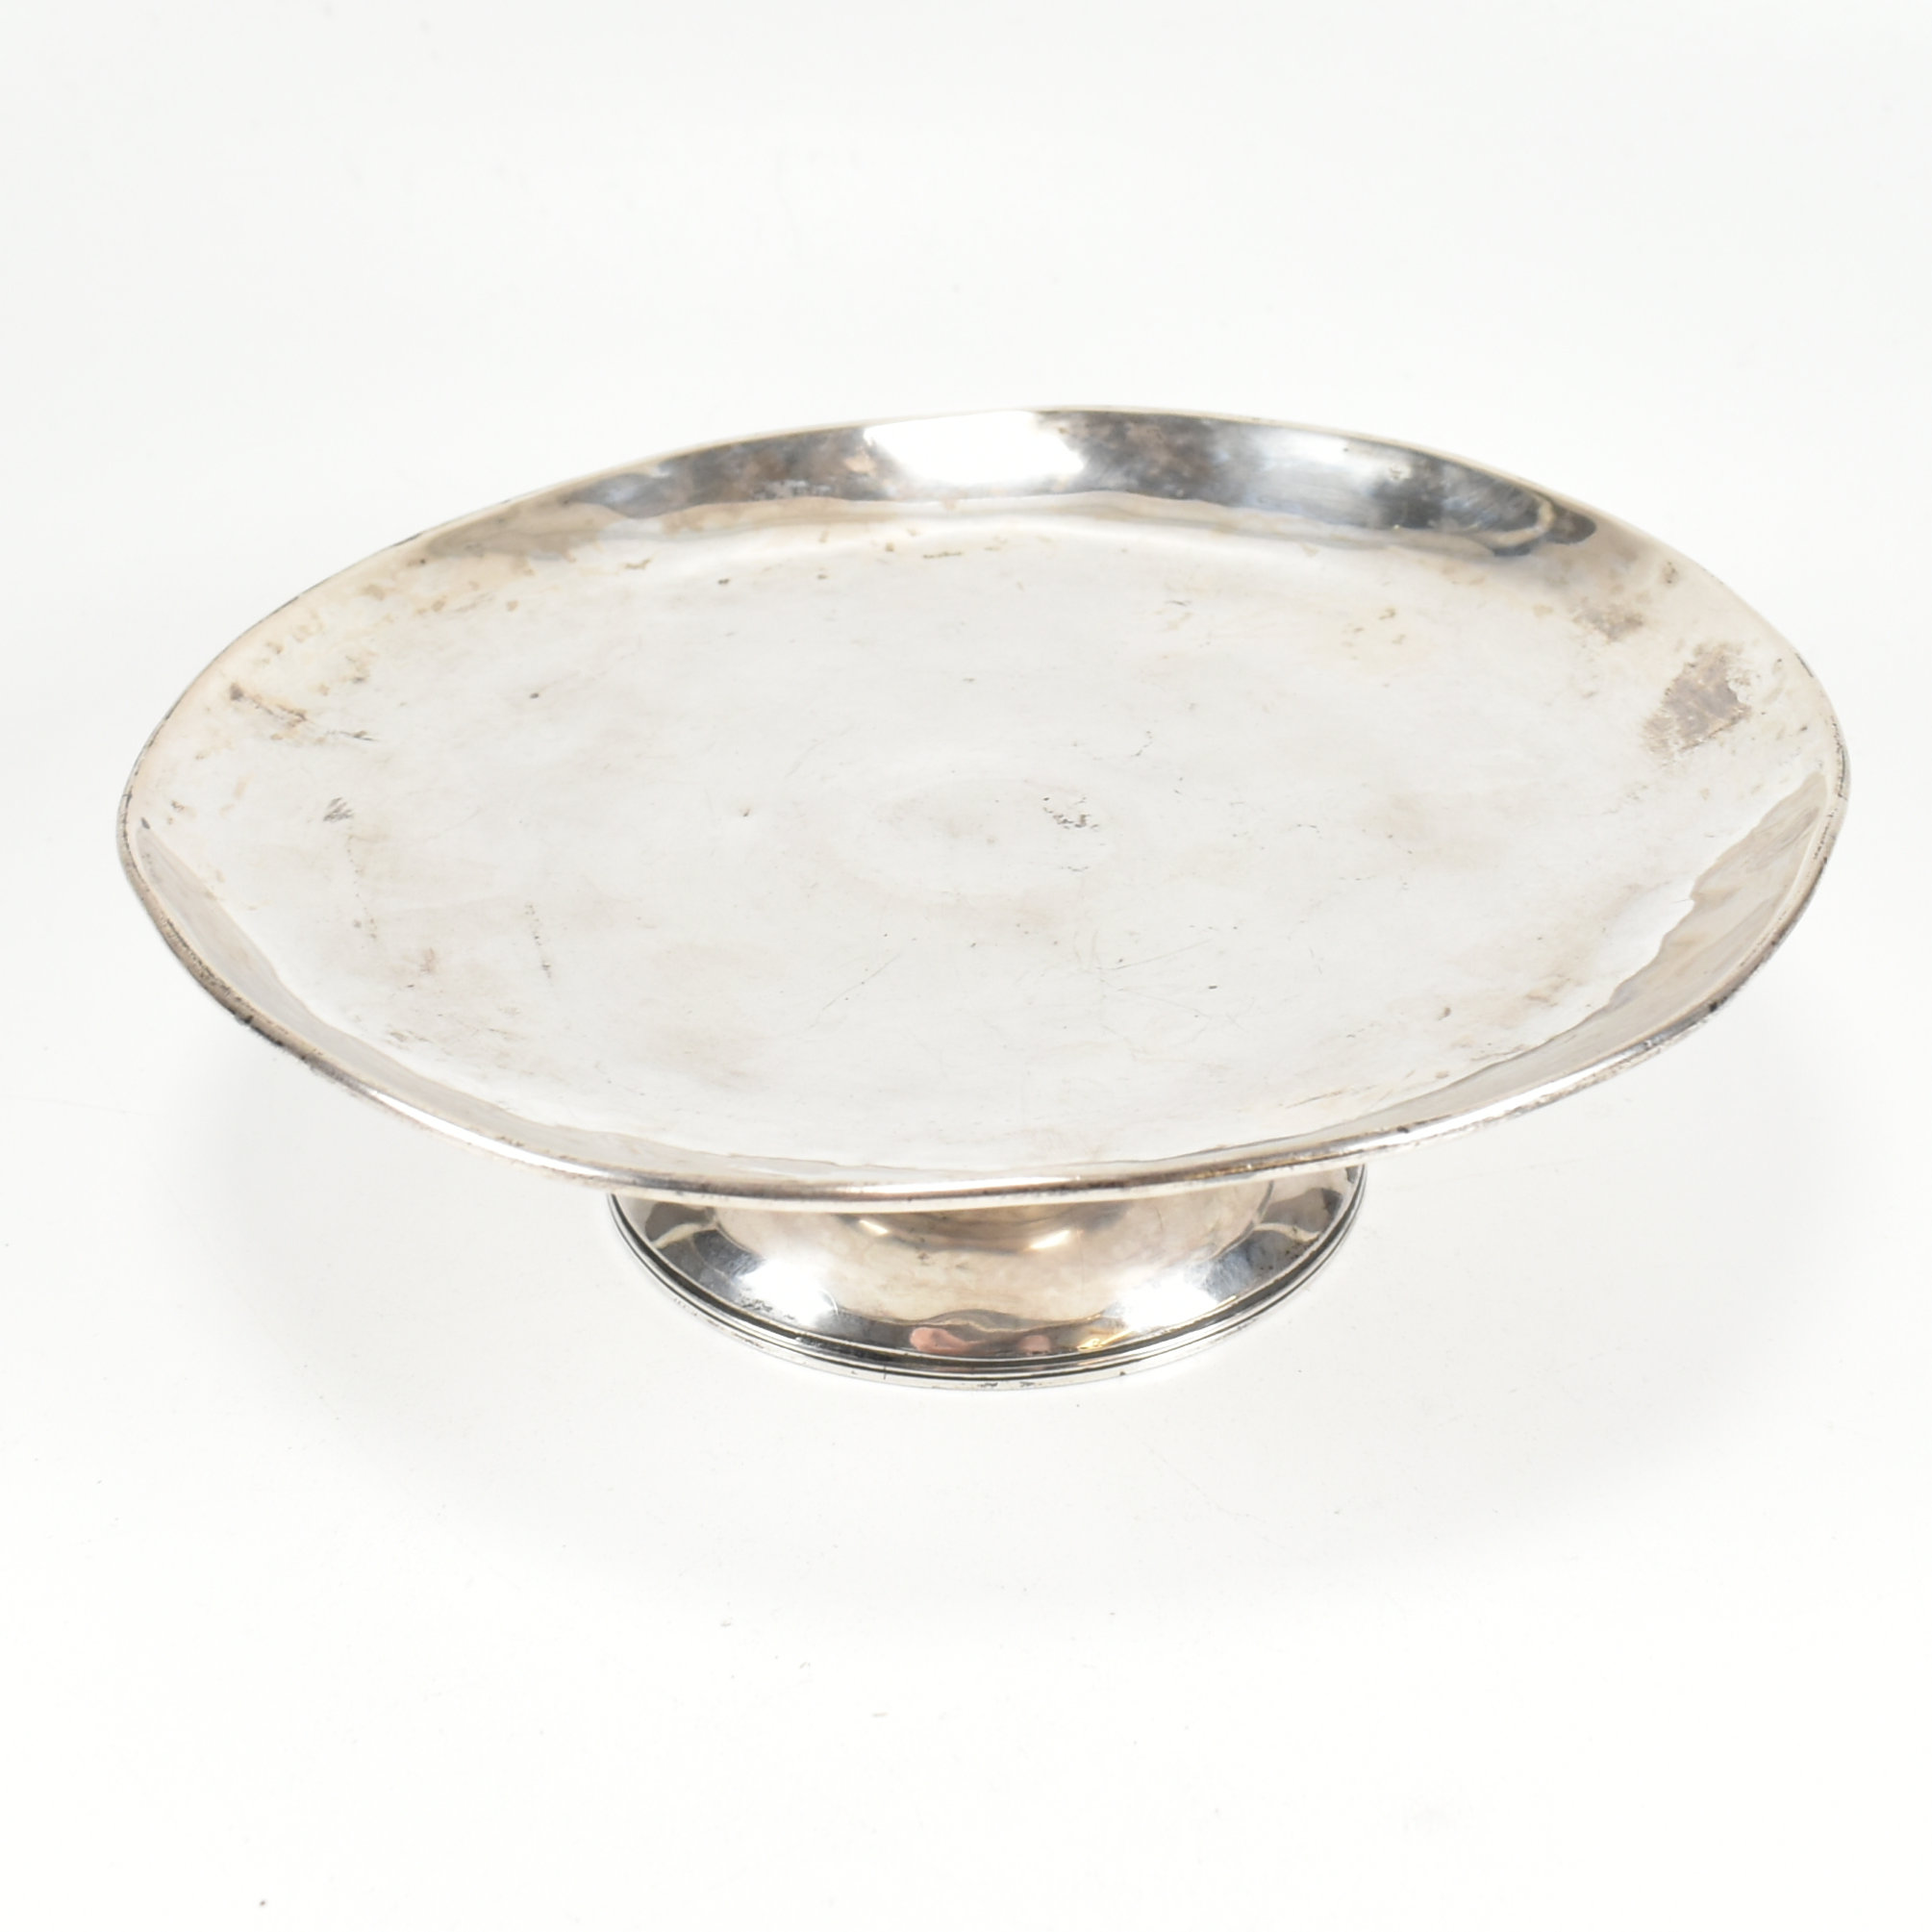 1960 ARTS & CRAFTS STYLE HALLMARKED SILVER COMPOTE - Image 2 of 6